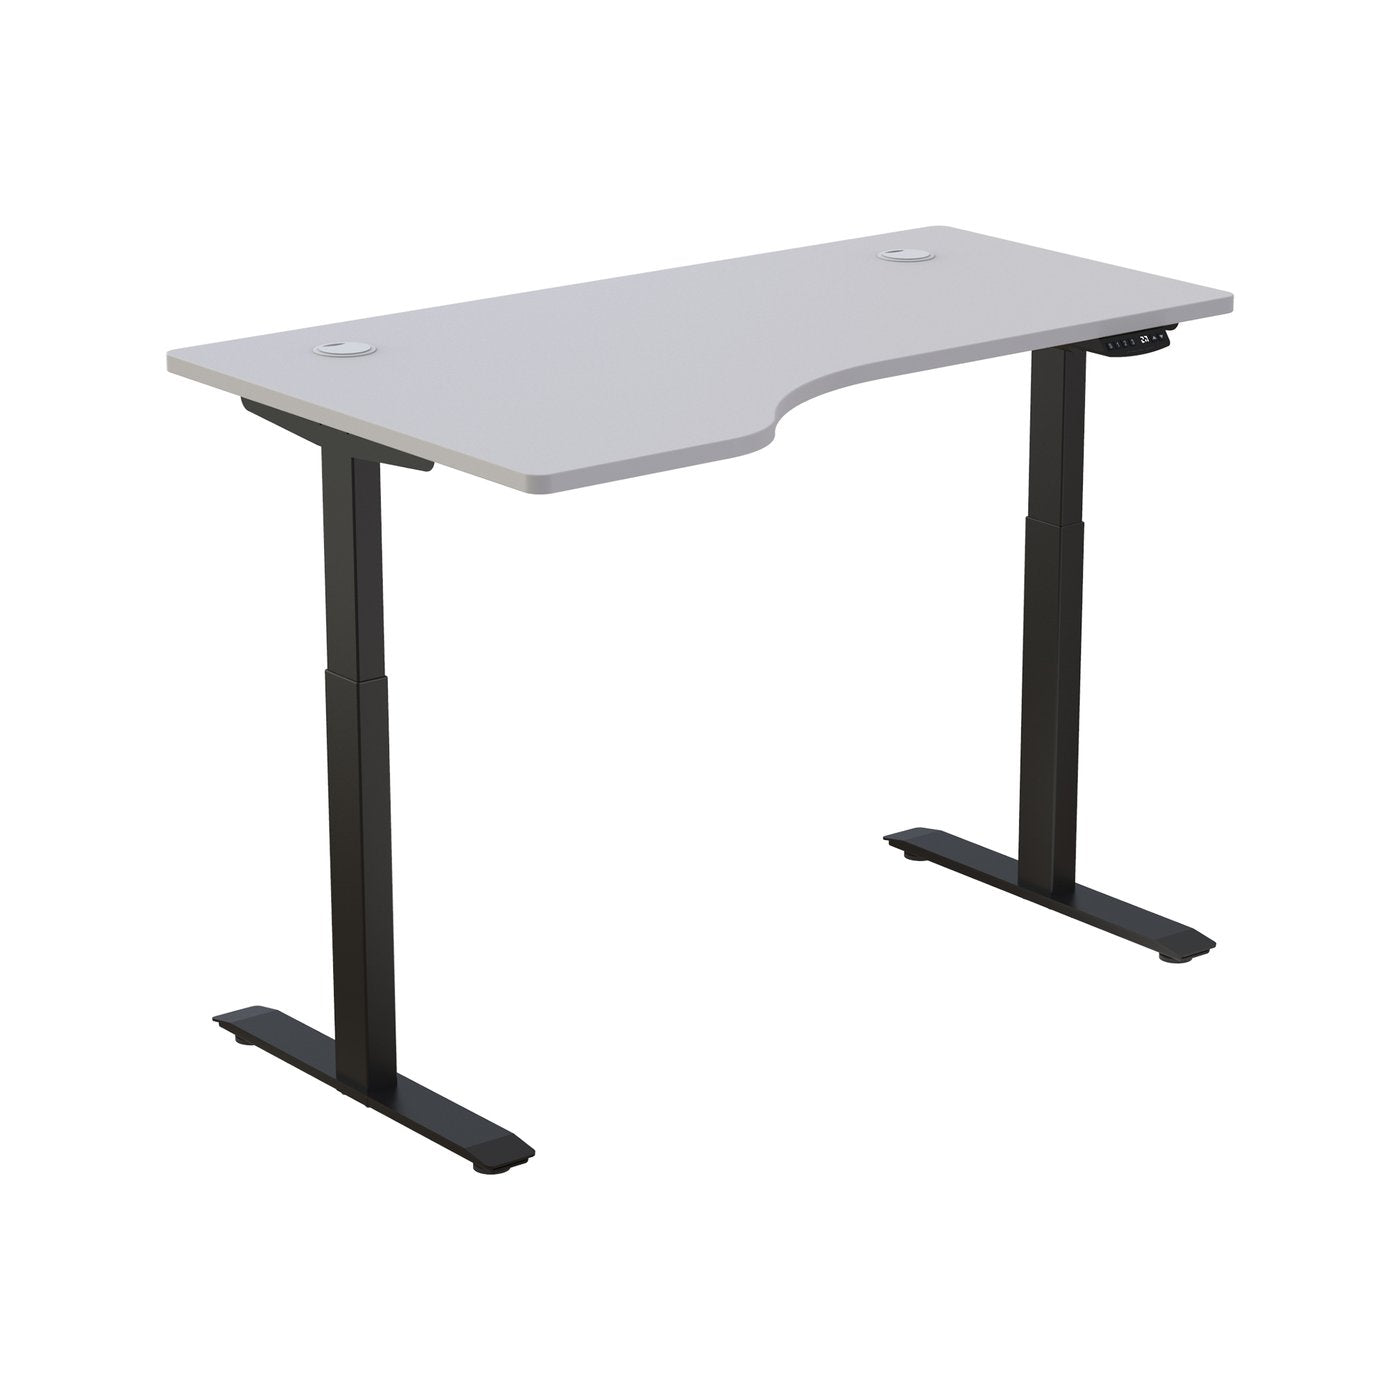 Bella2Bello's Electric Height Adjustable Standing Desk with ergonomic contoured Tabletop (59"x 31.5") and dual motor lift system for Home Office Workstation